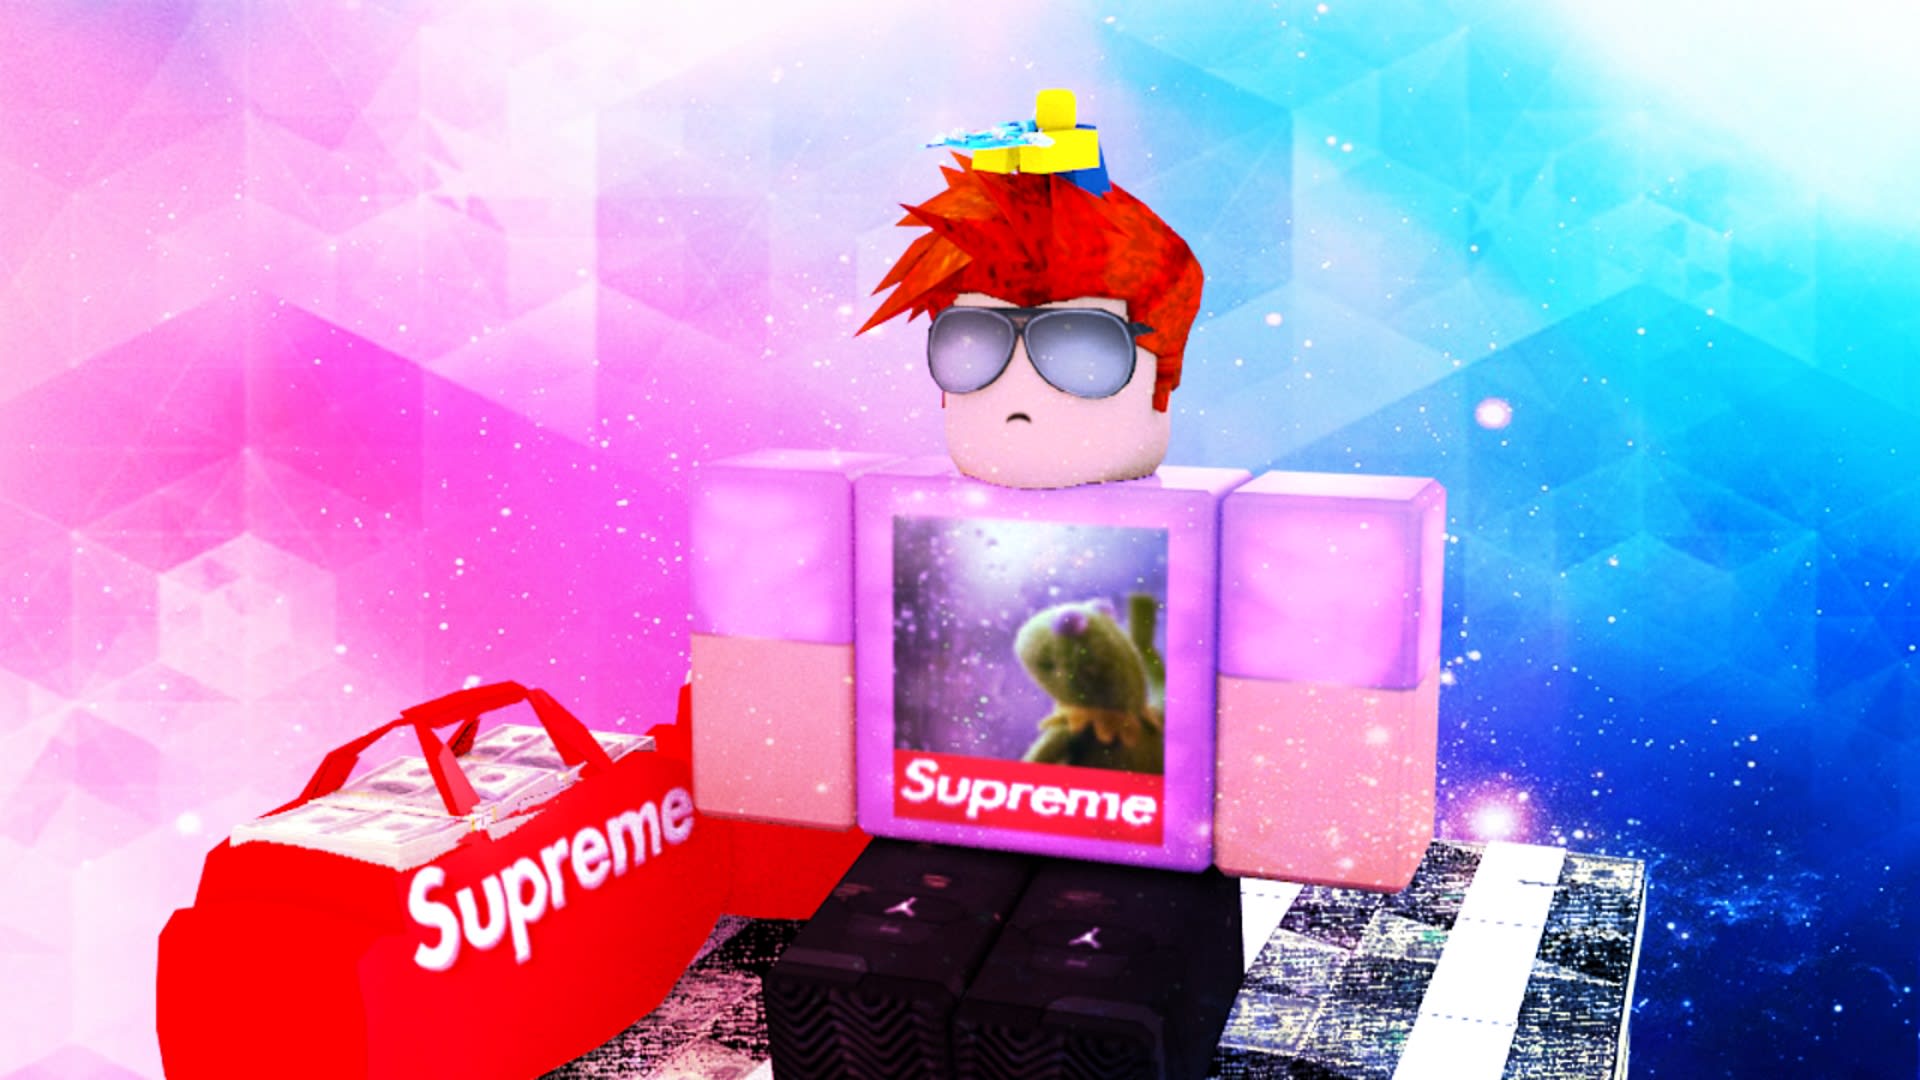 Be Doing Rendered Roblox Avatars Adverts Thumbnails Gfx By Fireyfeiry - roblox character renders plus ads by zilana